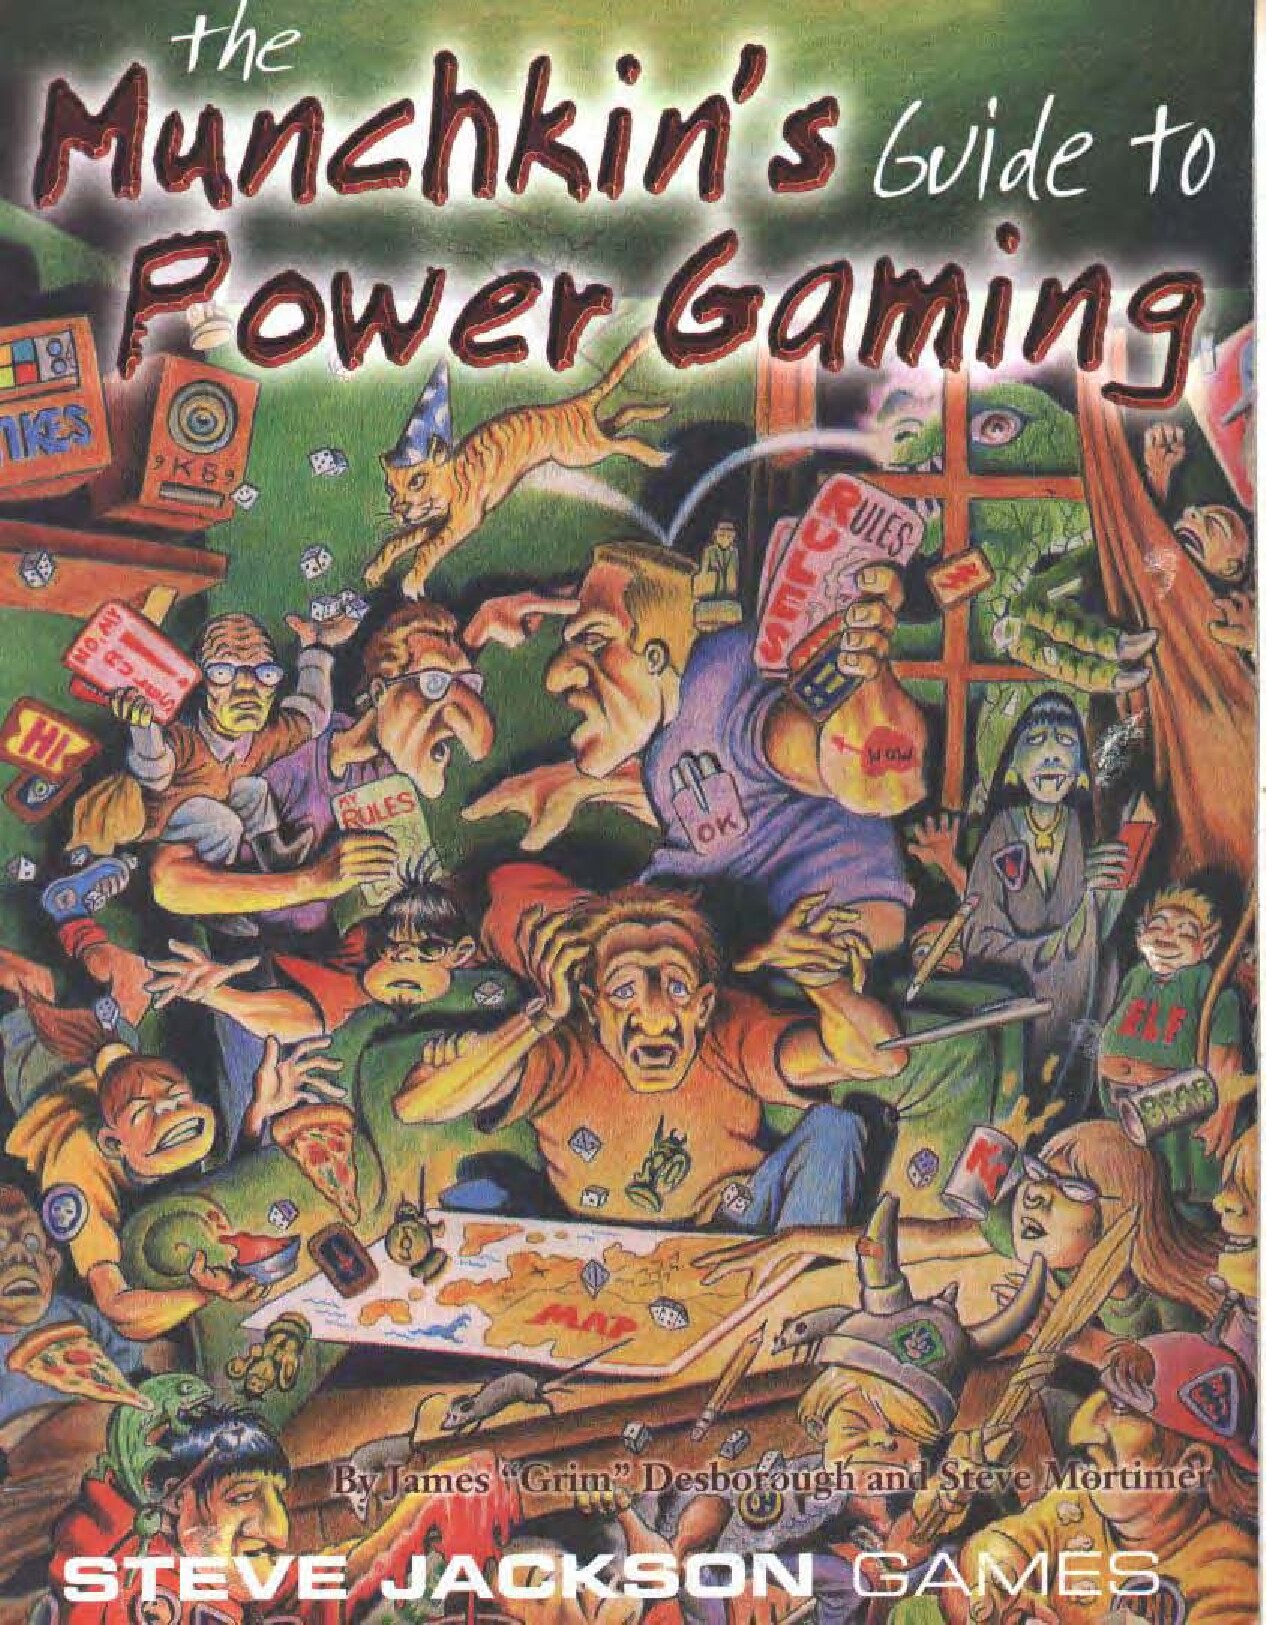 The Munchkin's Guide To Power Gaming